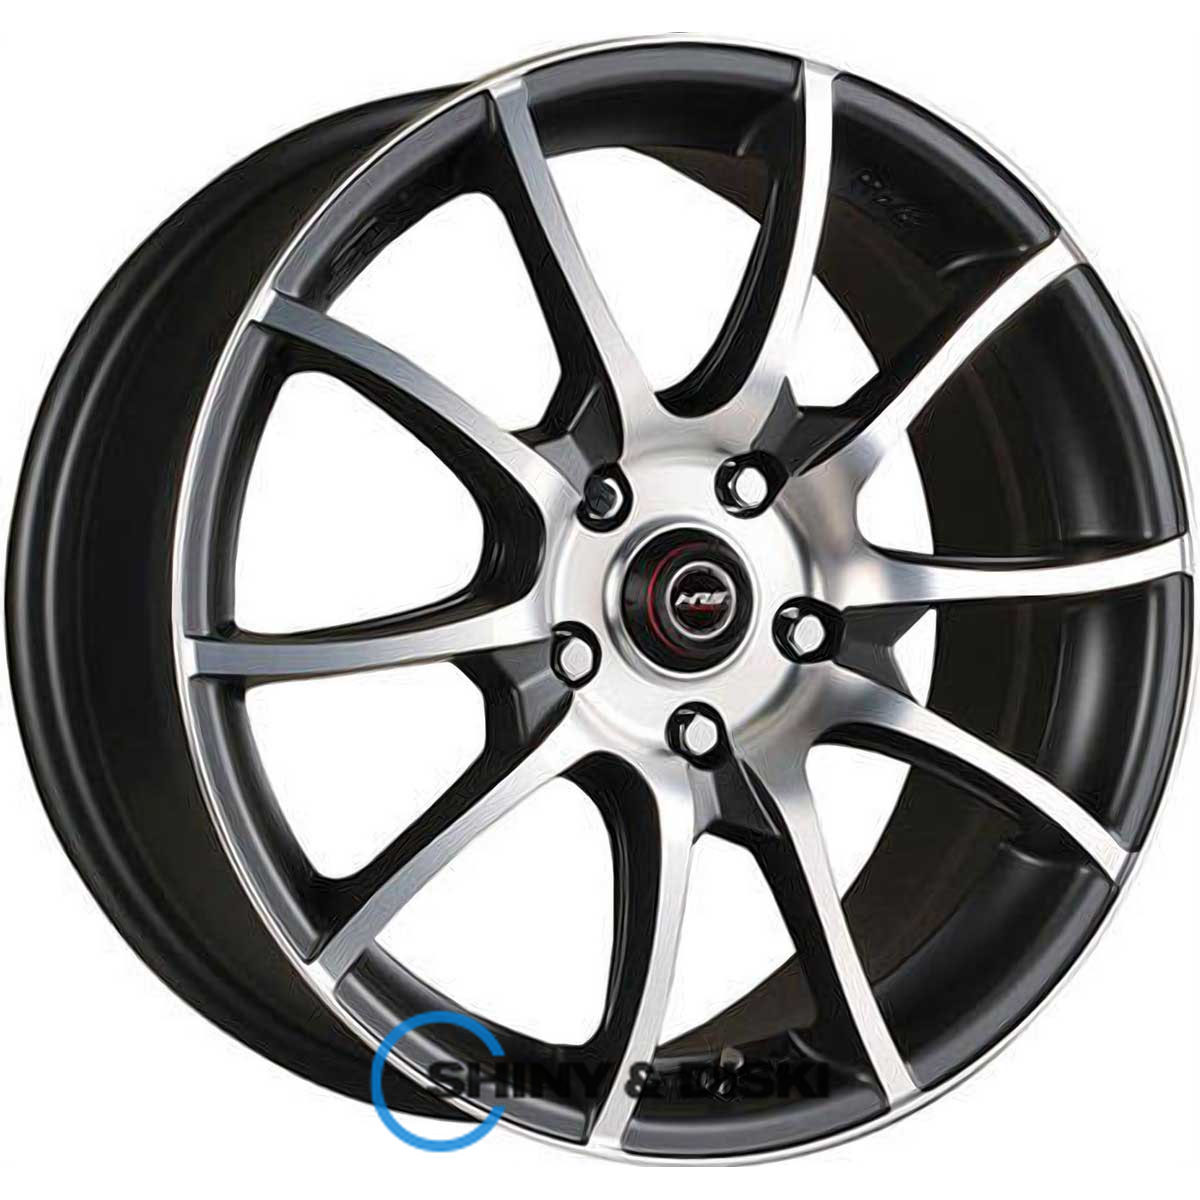 rs tuning h-470 bkfp r15 w6.5 pcd5x114.3 et40 dia67.1